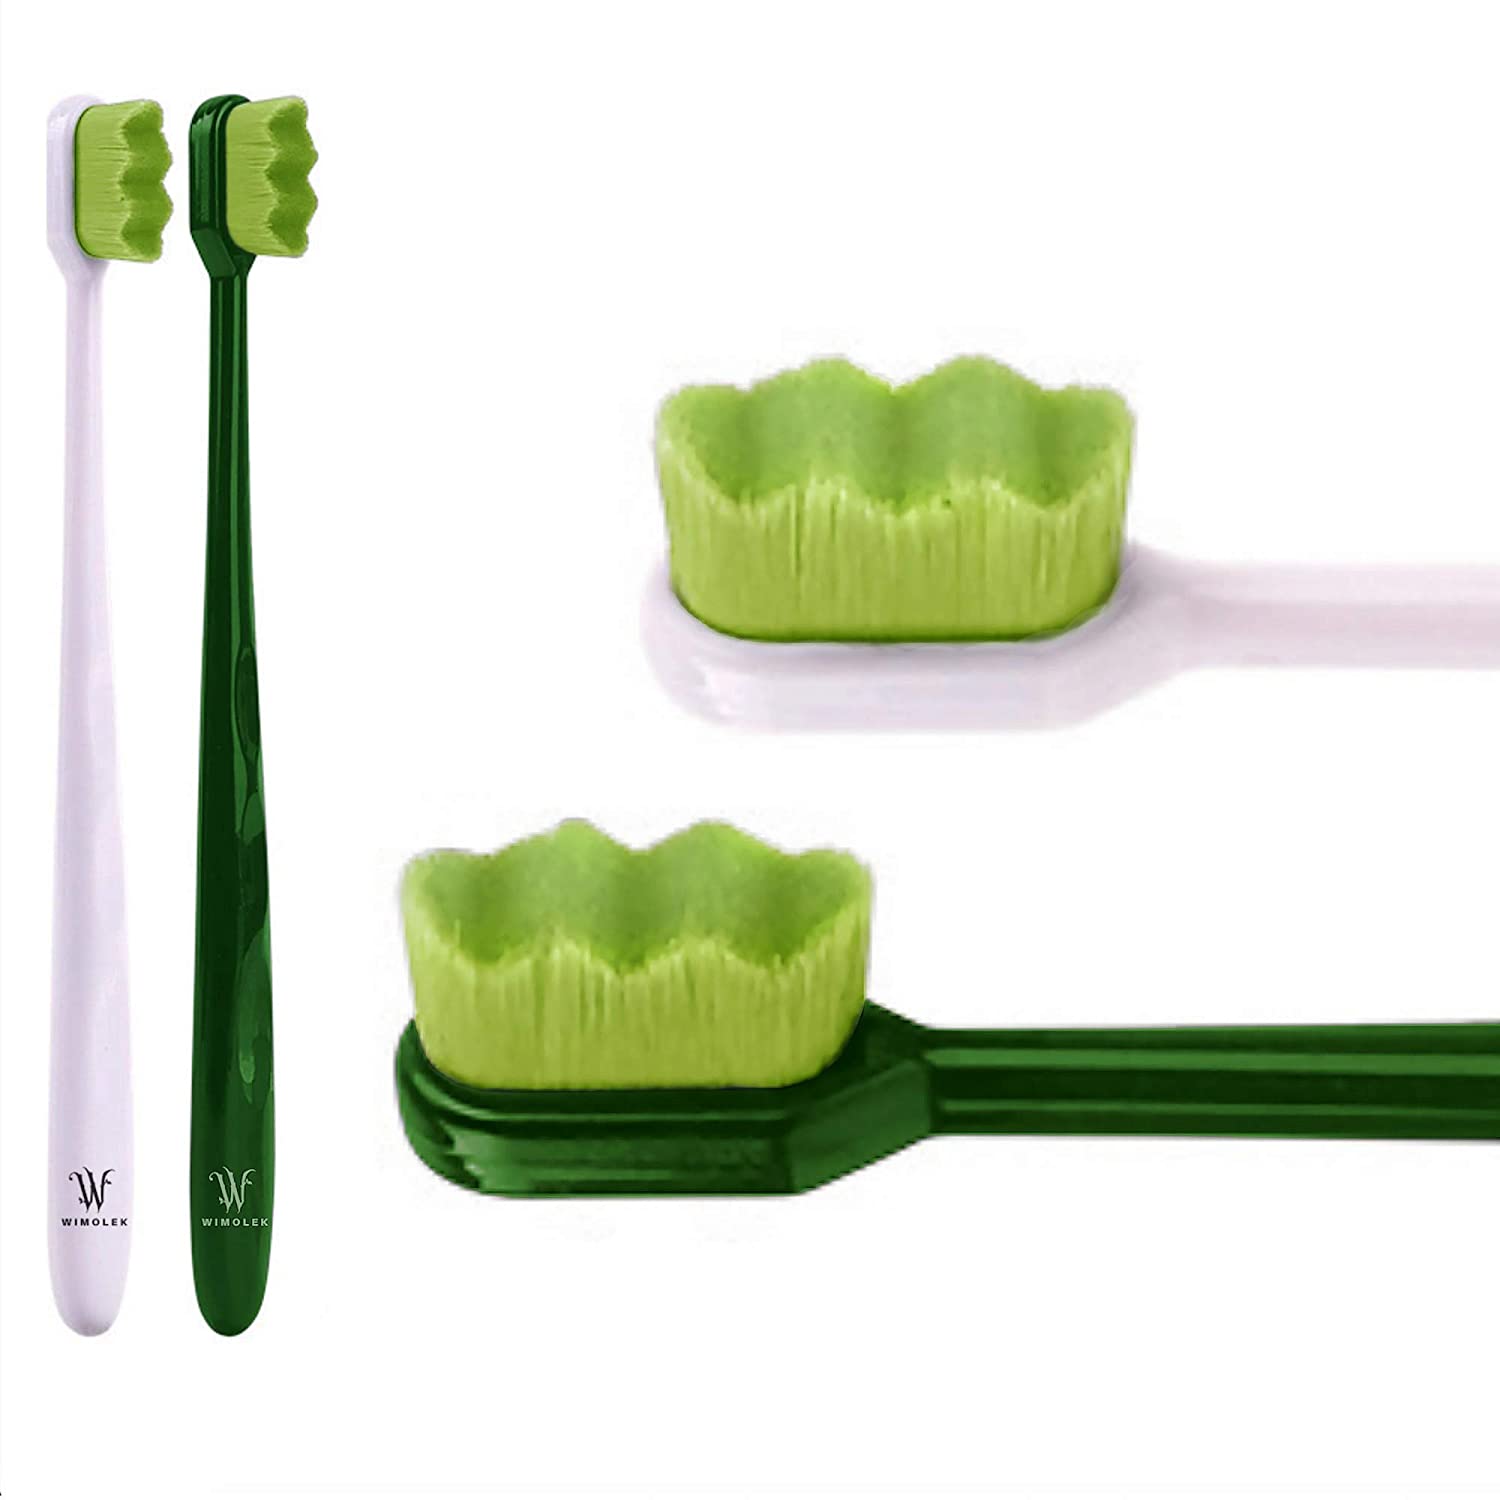 Extra Soft Toothbrush for Sensitive Gums and Teeth. Micro Nano Toothbrushes